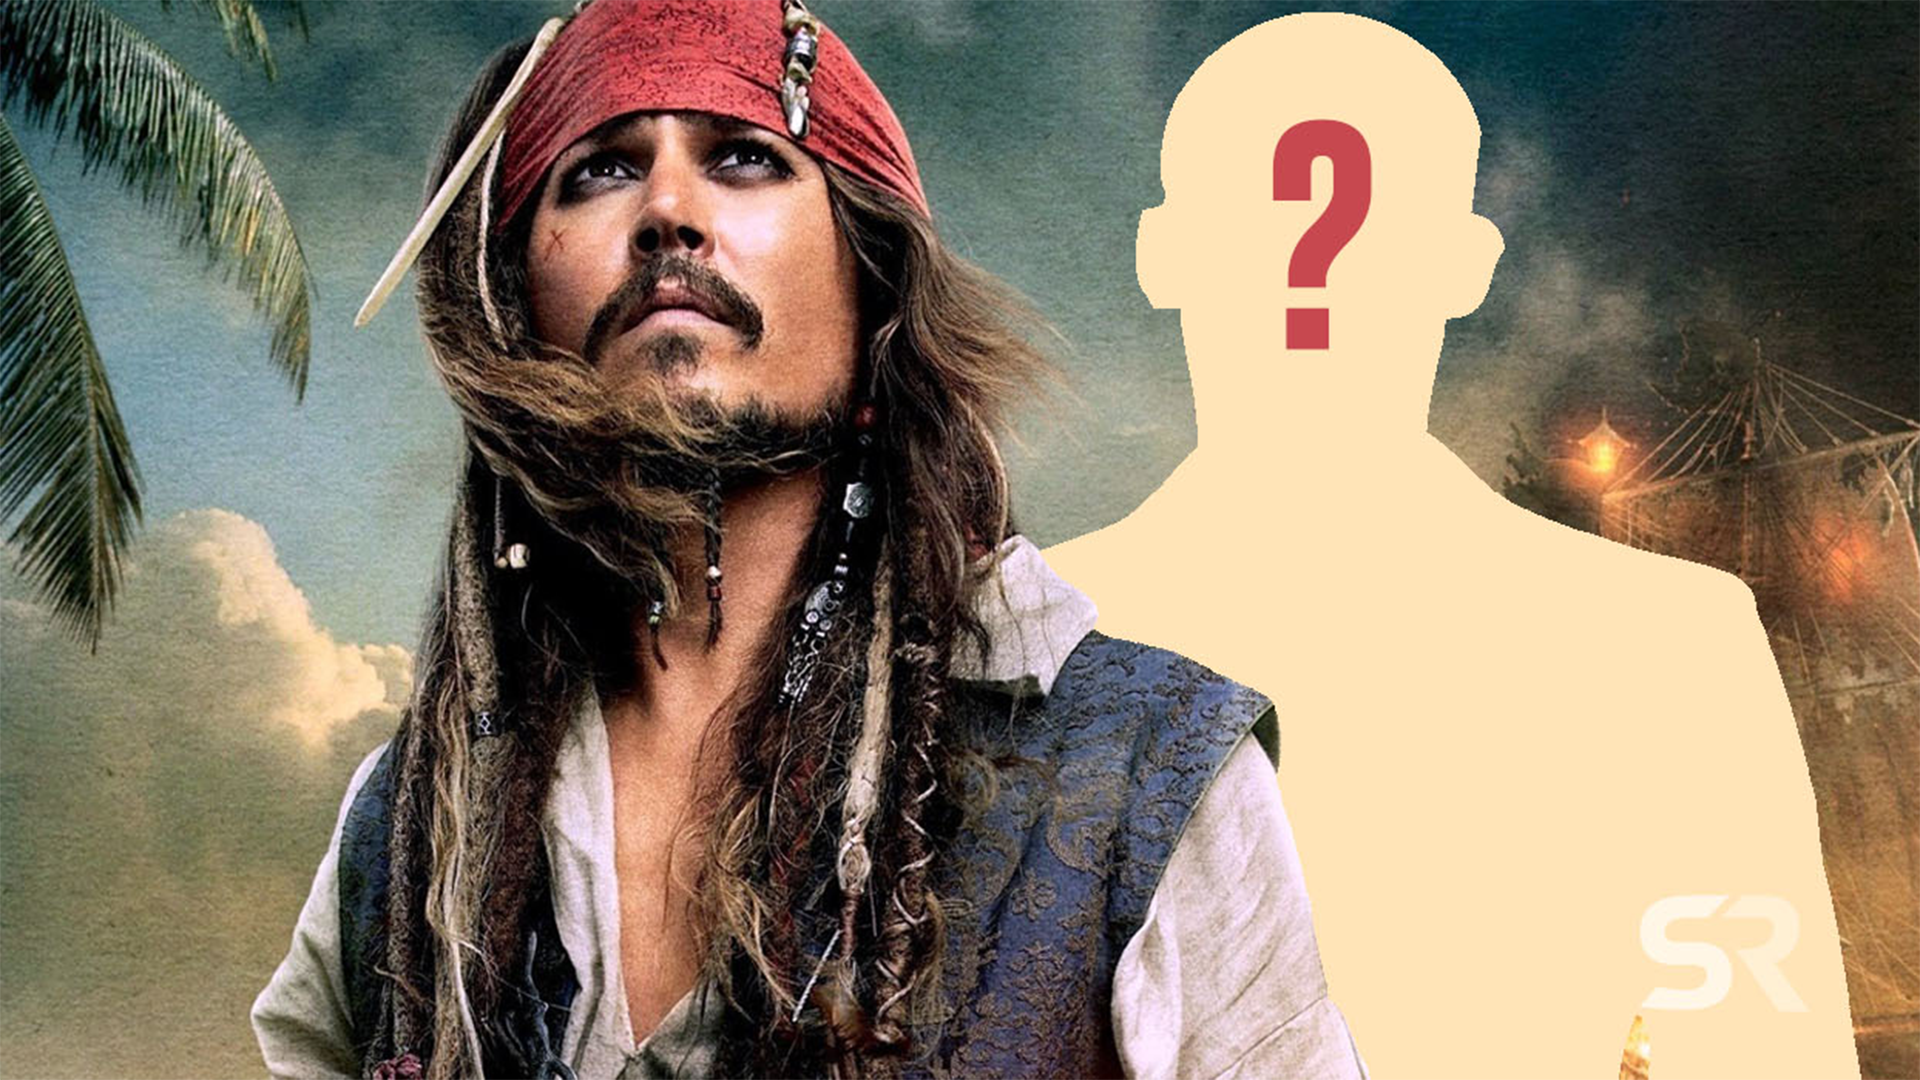 Pirates of the Caribbean Jack Sparrow Video Image